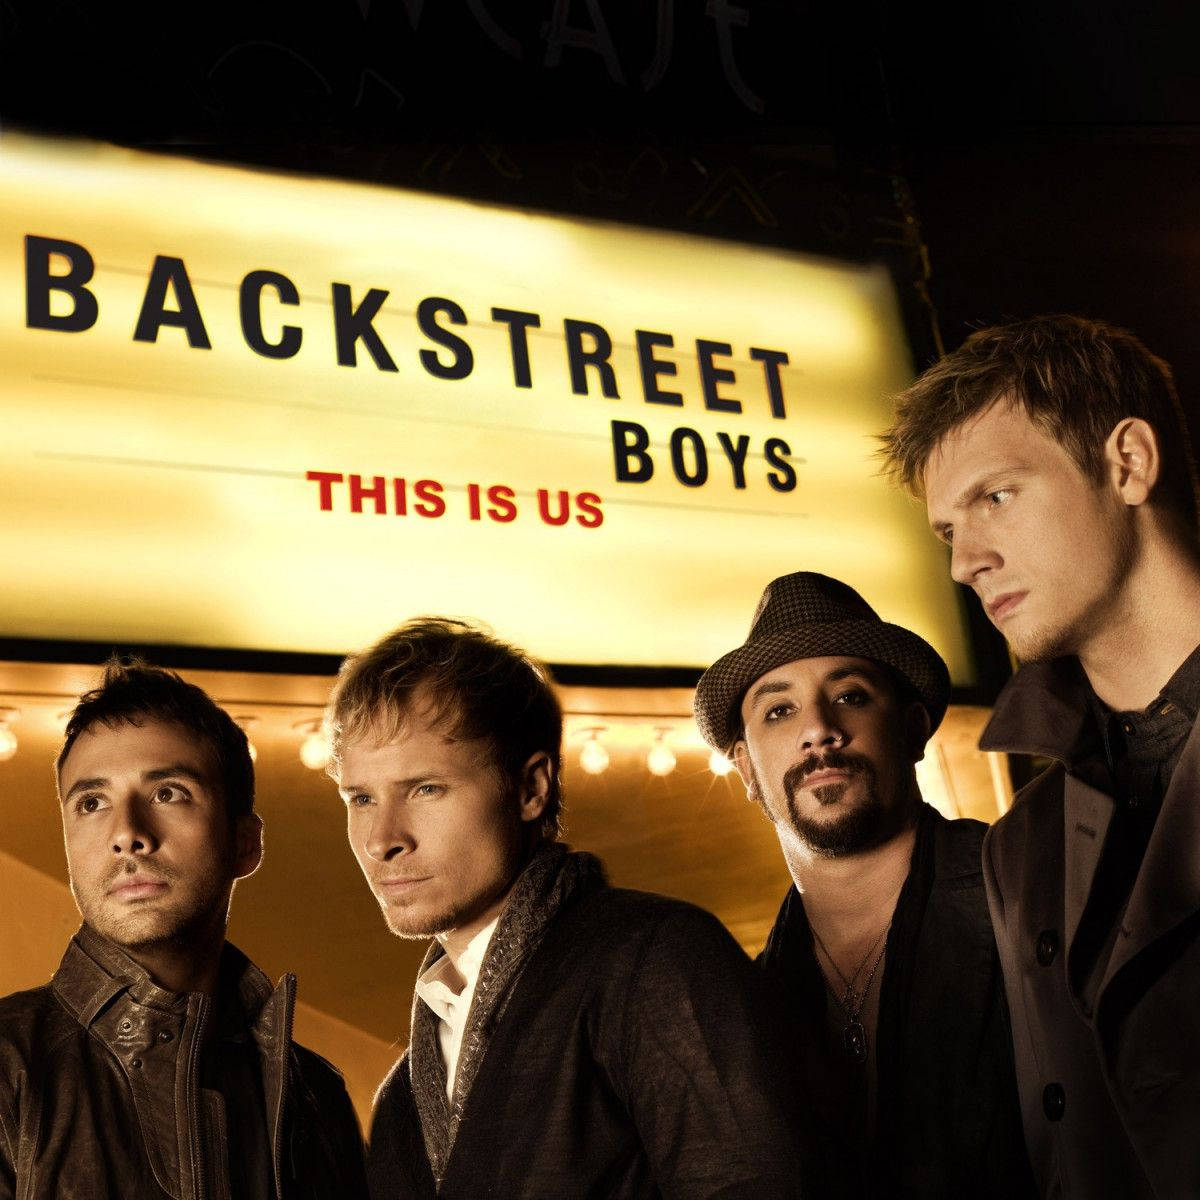 Image Backstreet Boys This Is Us Poster Wallpaper